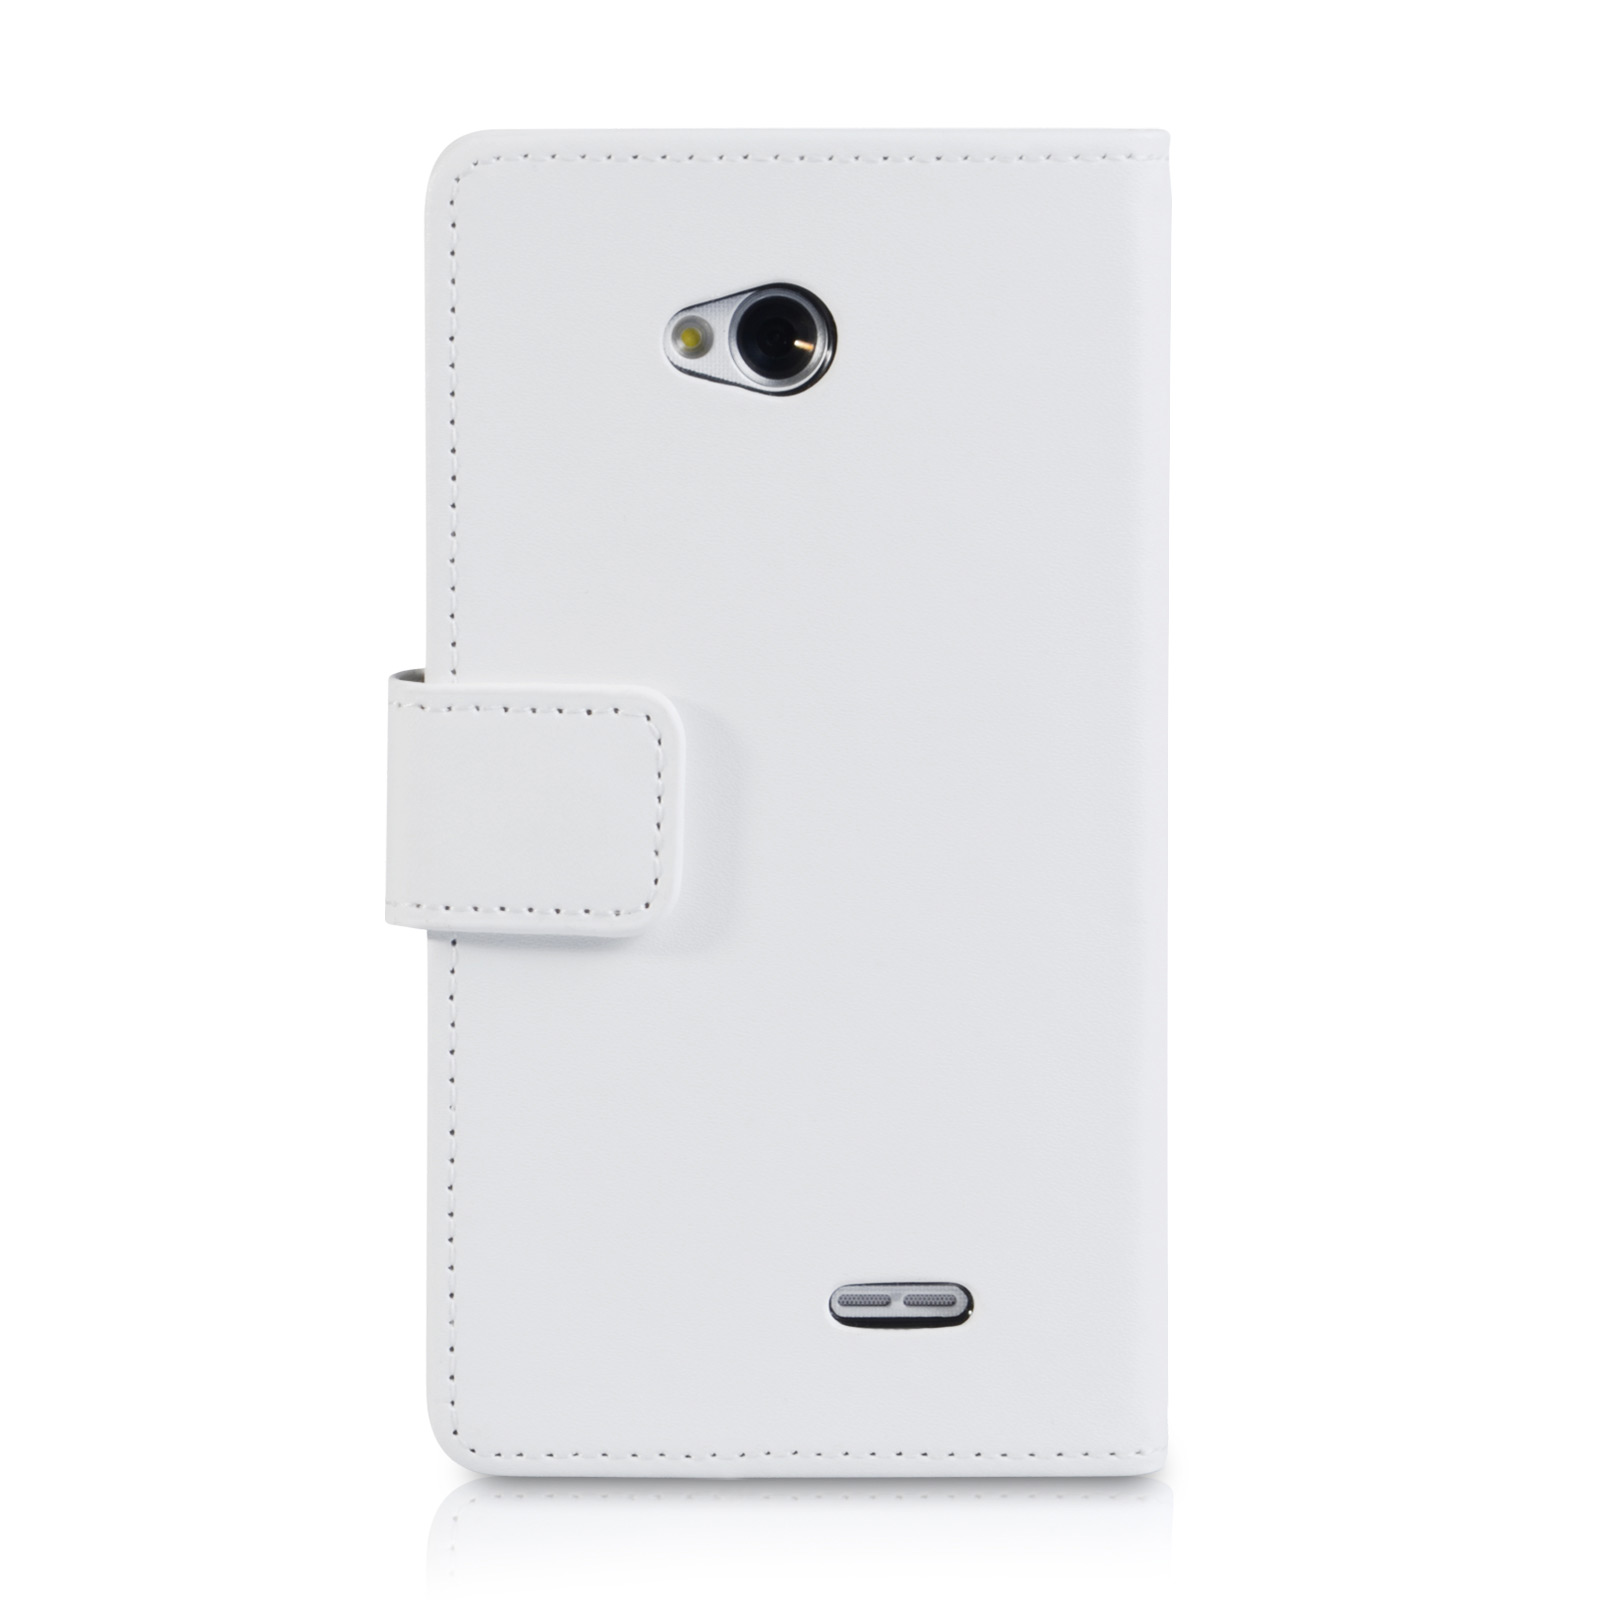 YouSave Accessories LG L90 Leather-Effect Wallet Case - White